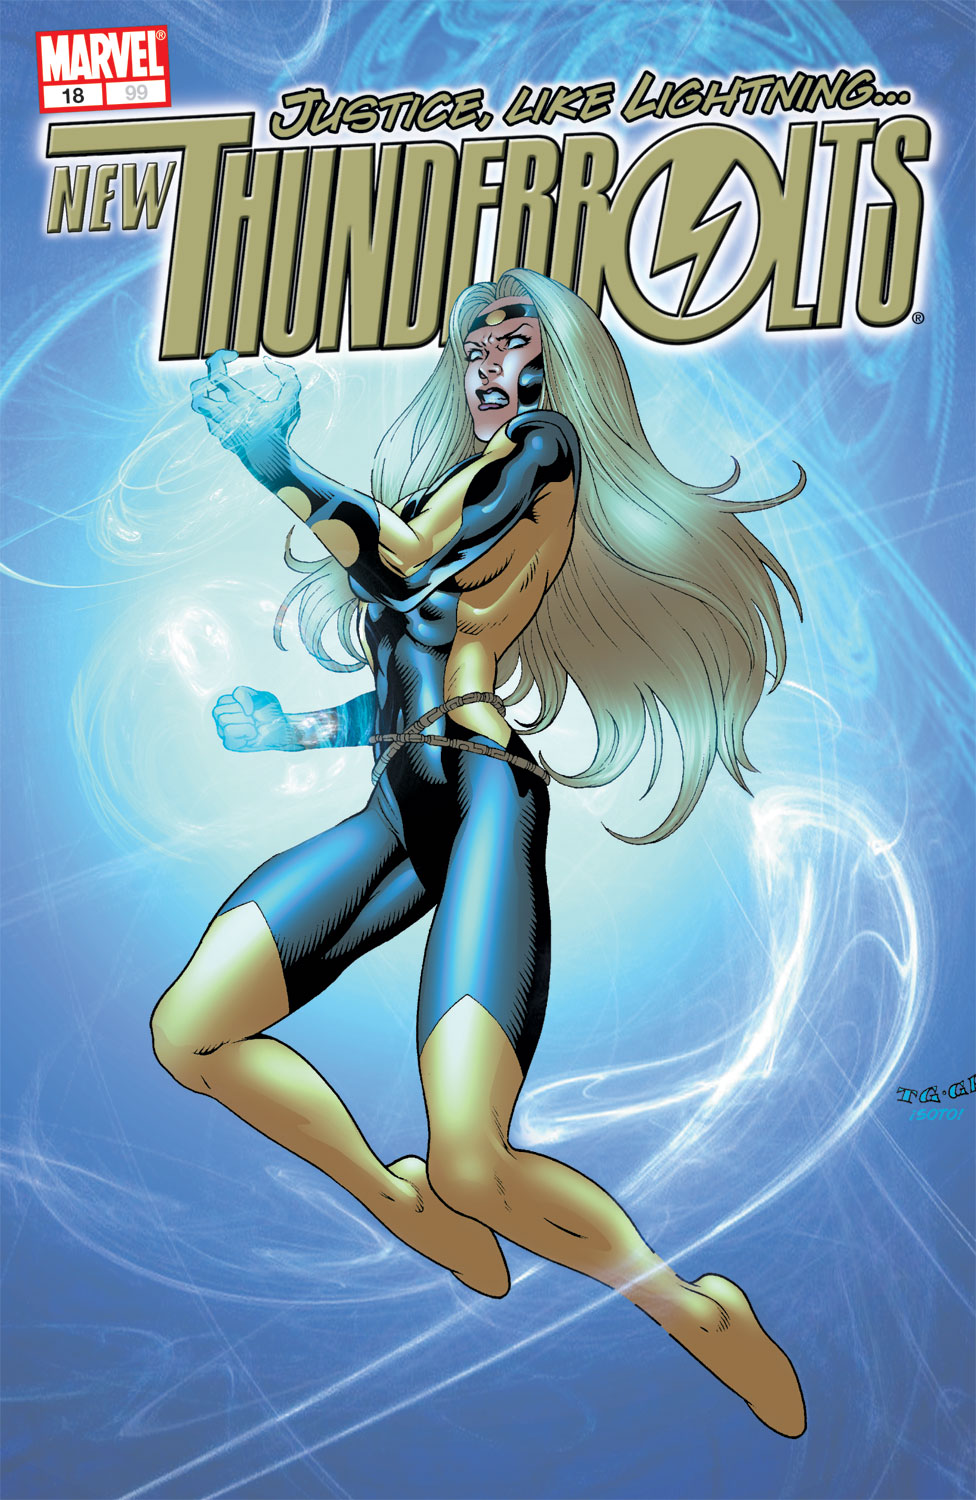 Read online New Thunderbolts comic -  Issue #18 - 1